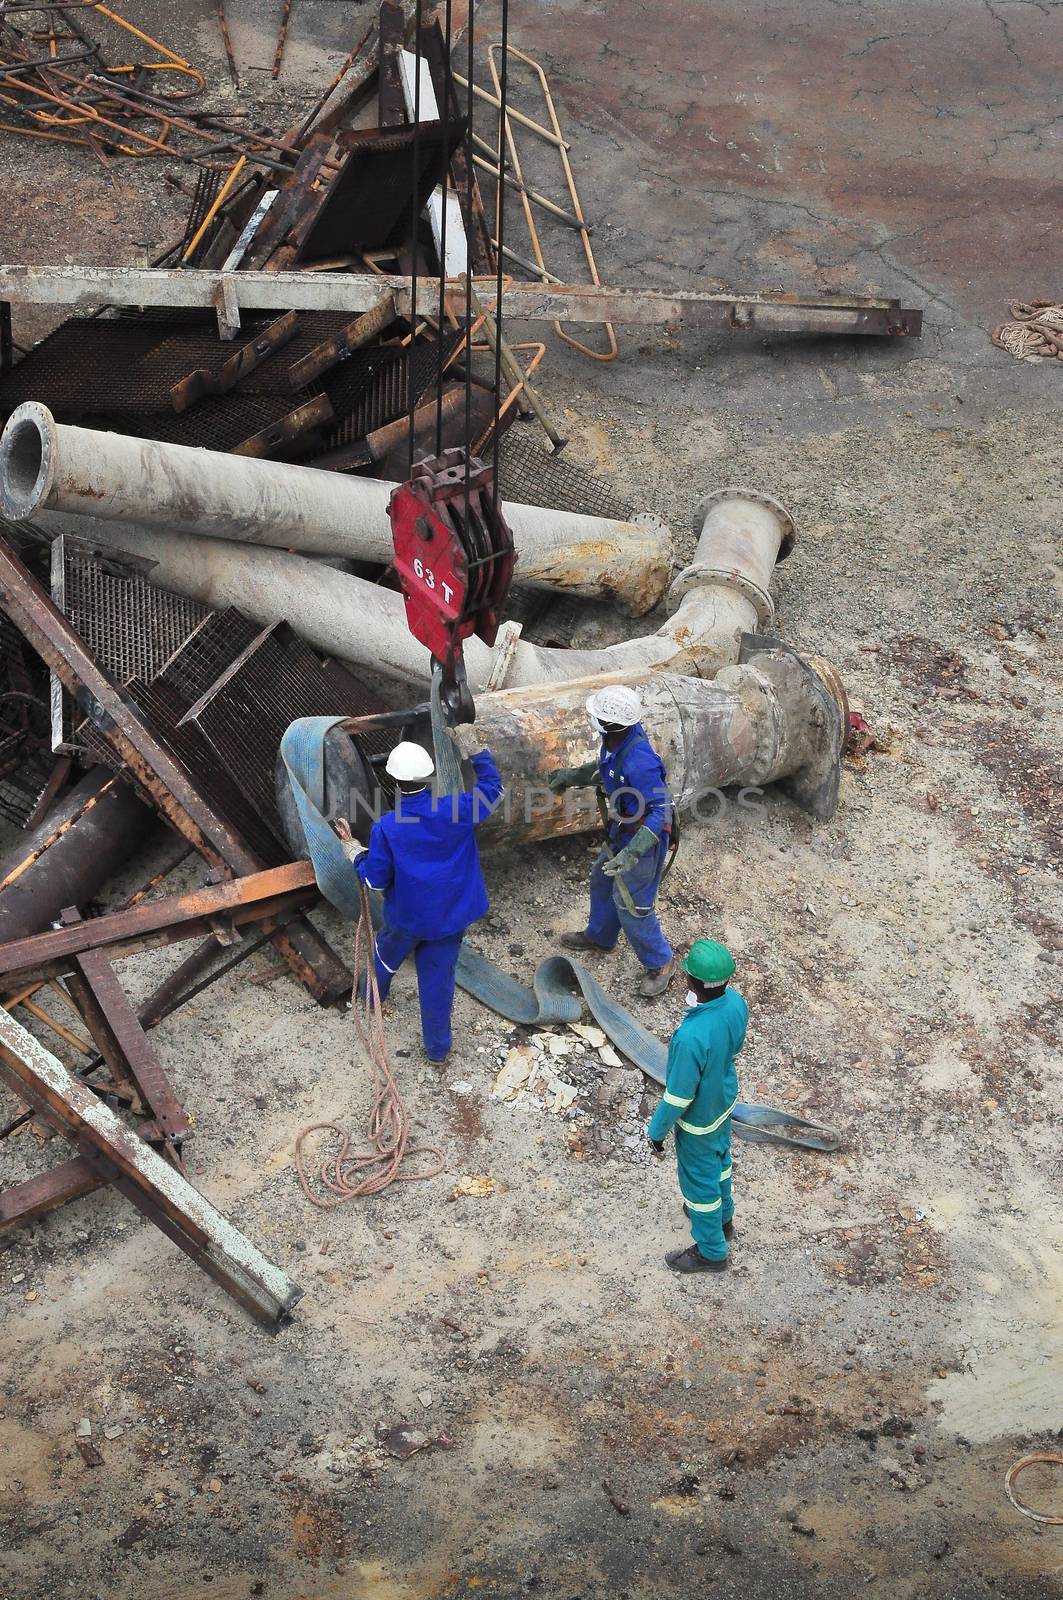 Workers on the ground, seen from above, busy either hooking up or unhooking large structural pieces of equipment with a crane hook overhead.